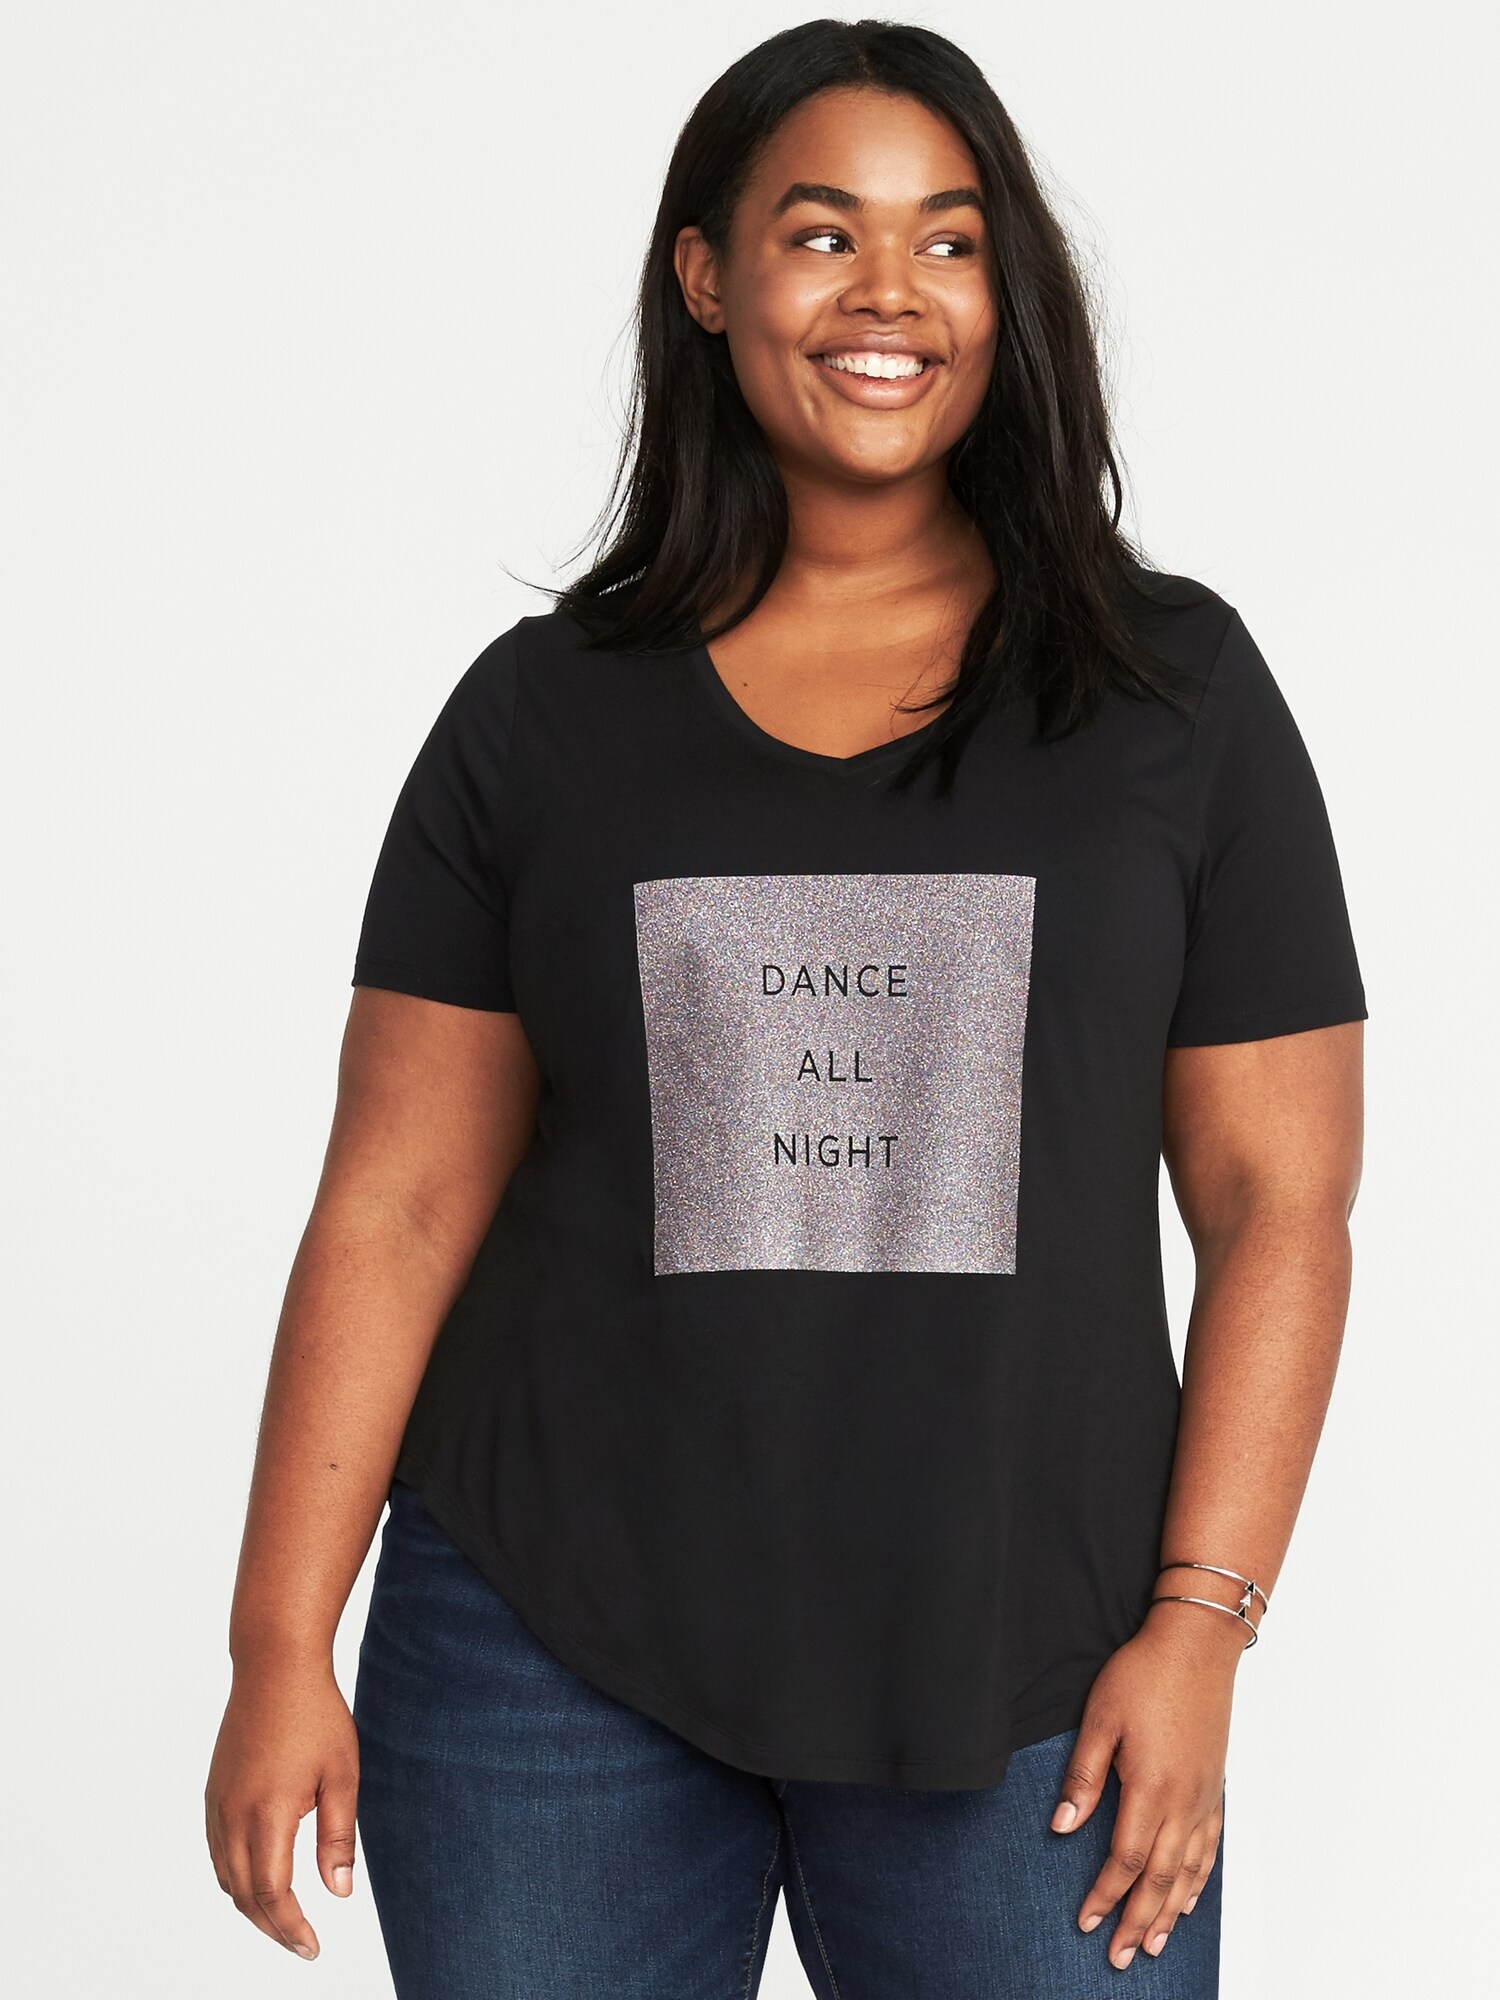 Relaxed Plus-Size Graphic Tee | Old Navy